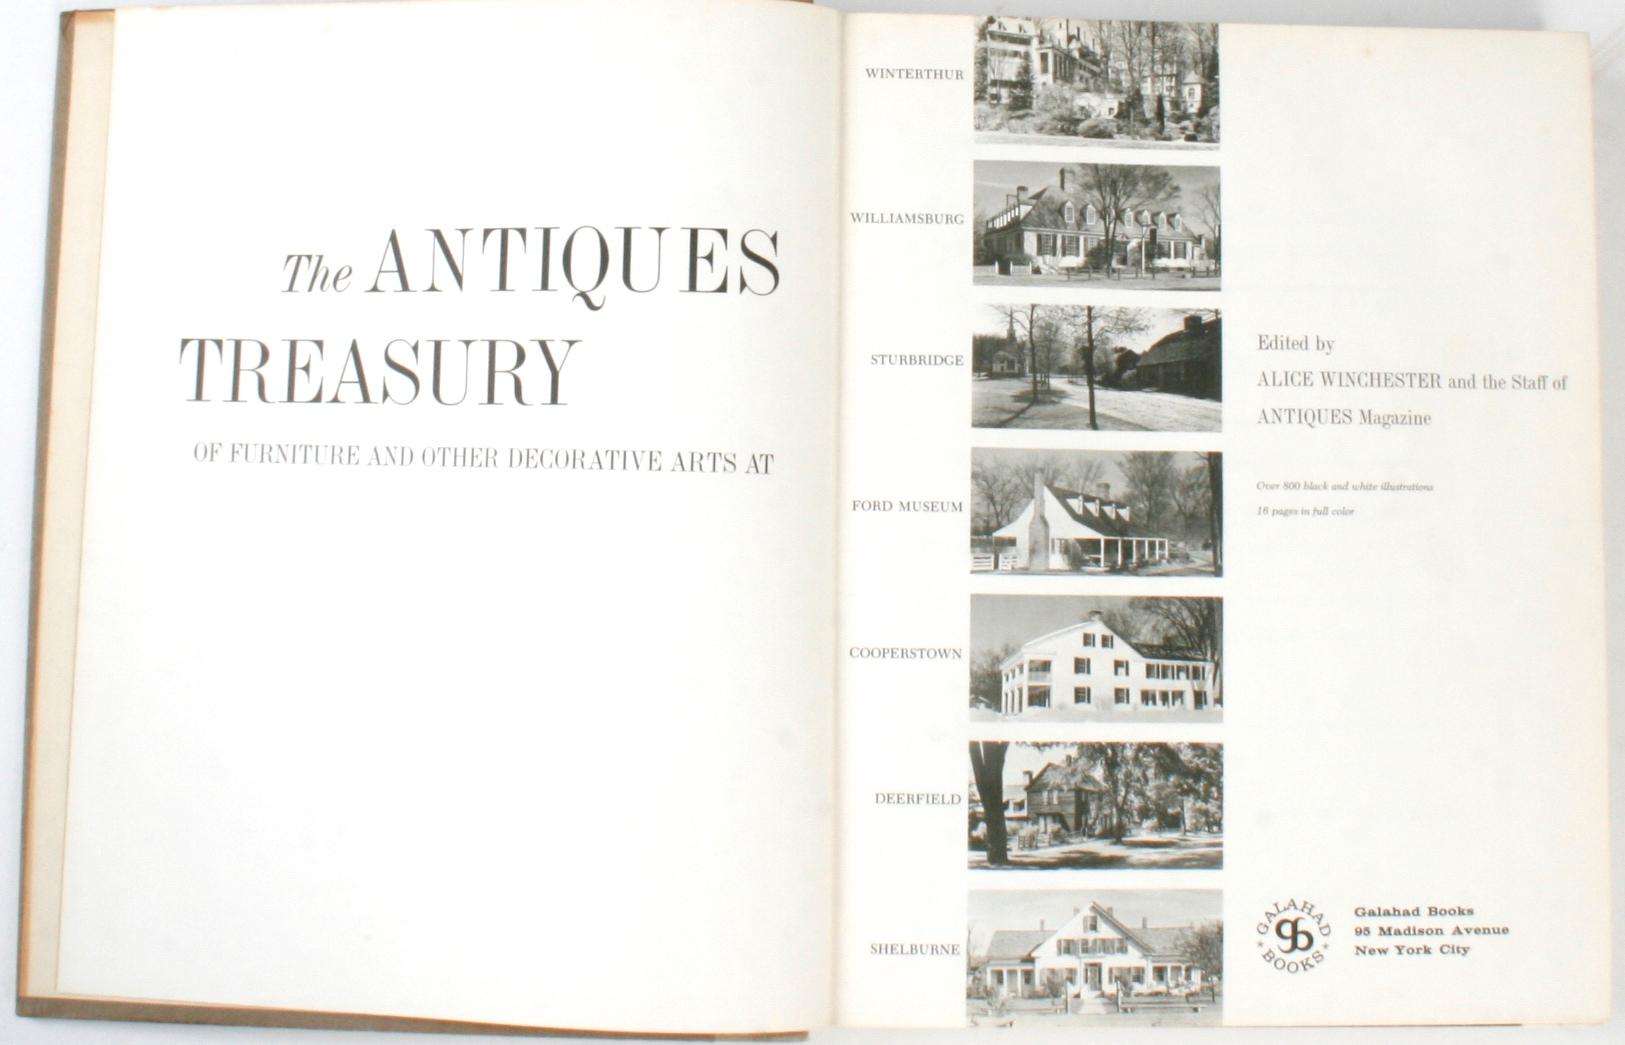 The antiques treasury of furniture and other decorative arts. New York: Galahad Books, 1959. Hardcover with no dust jacket. 320 pp. A resource book by the editors of 